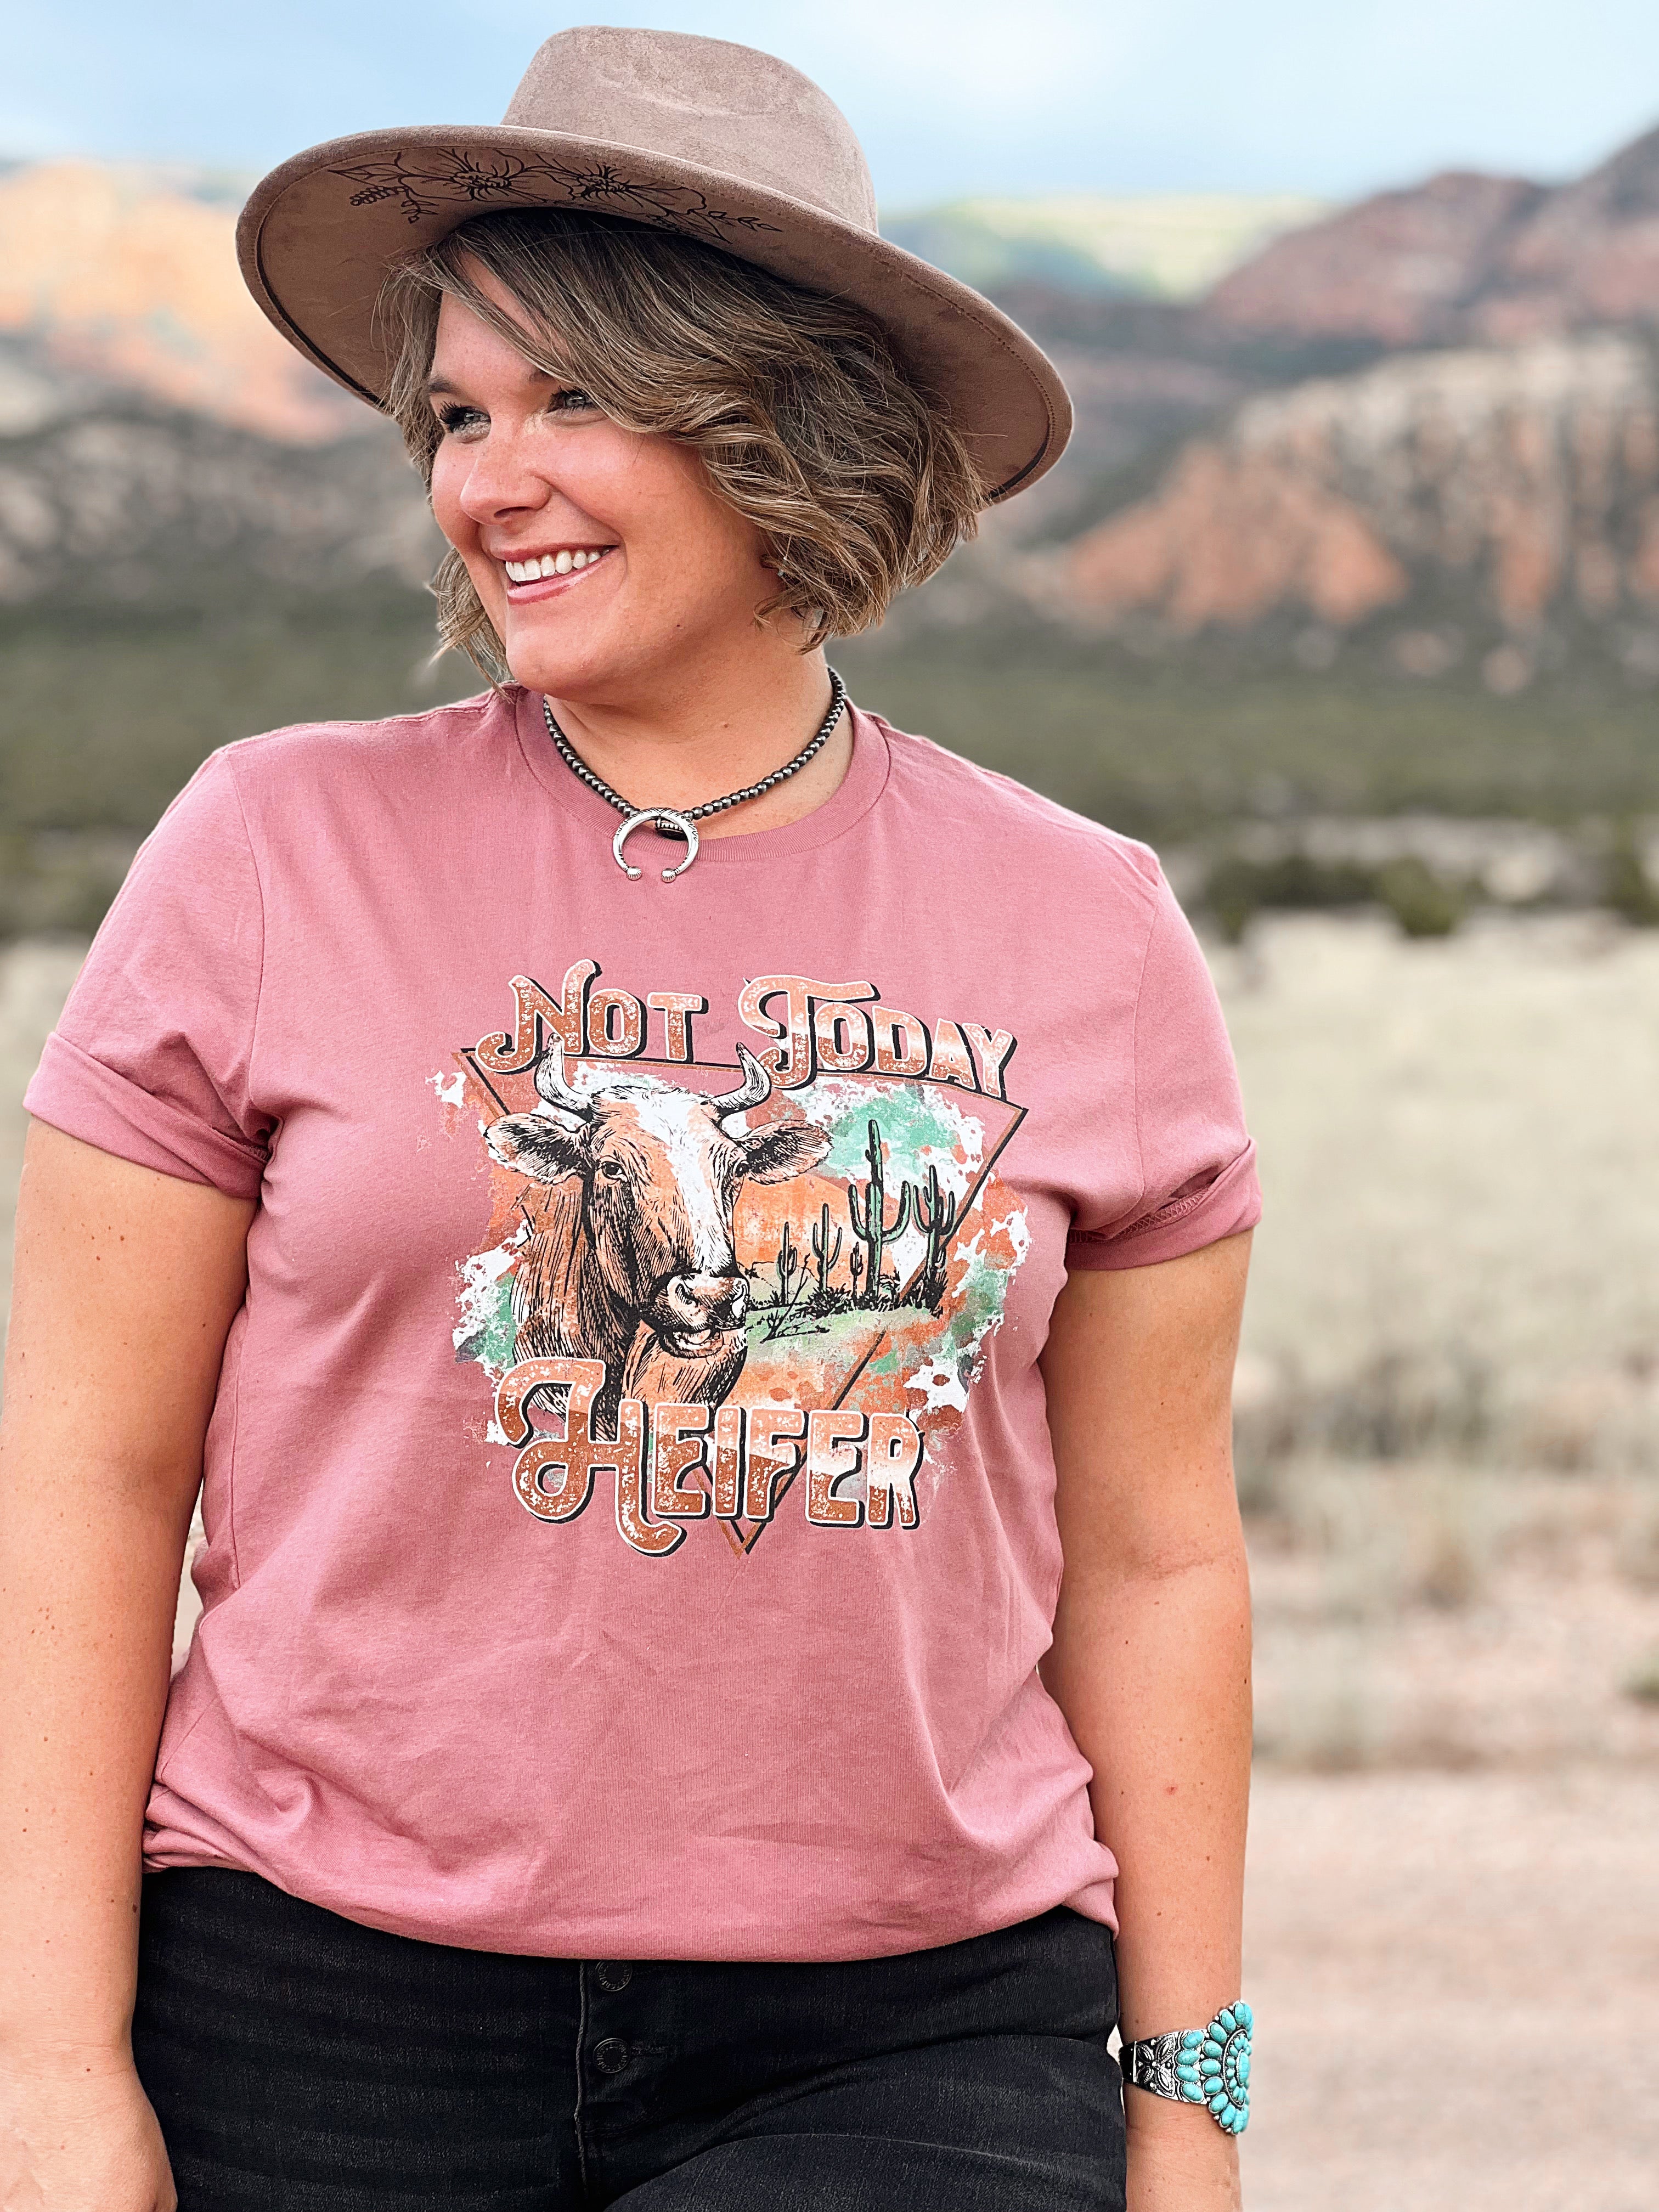 Not Today Heifer Graphic Tee